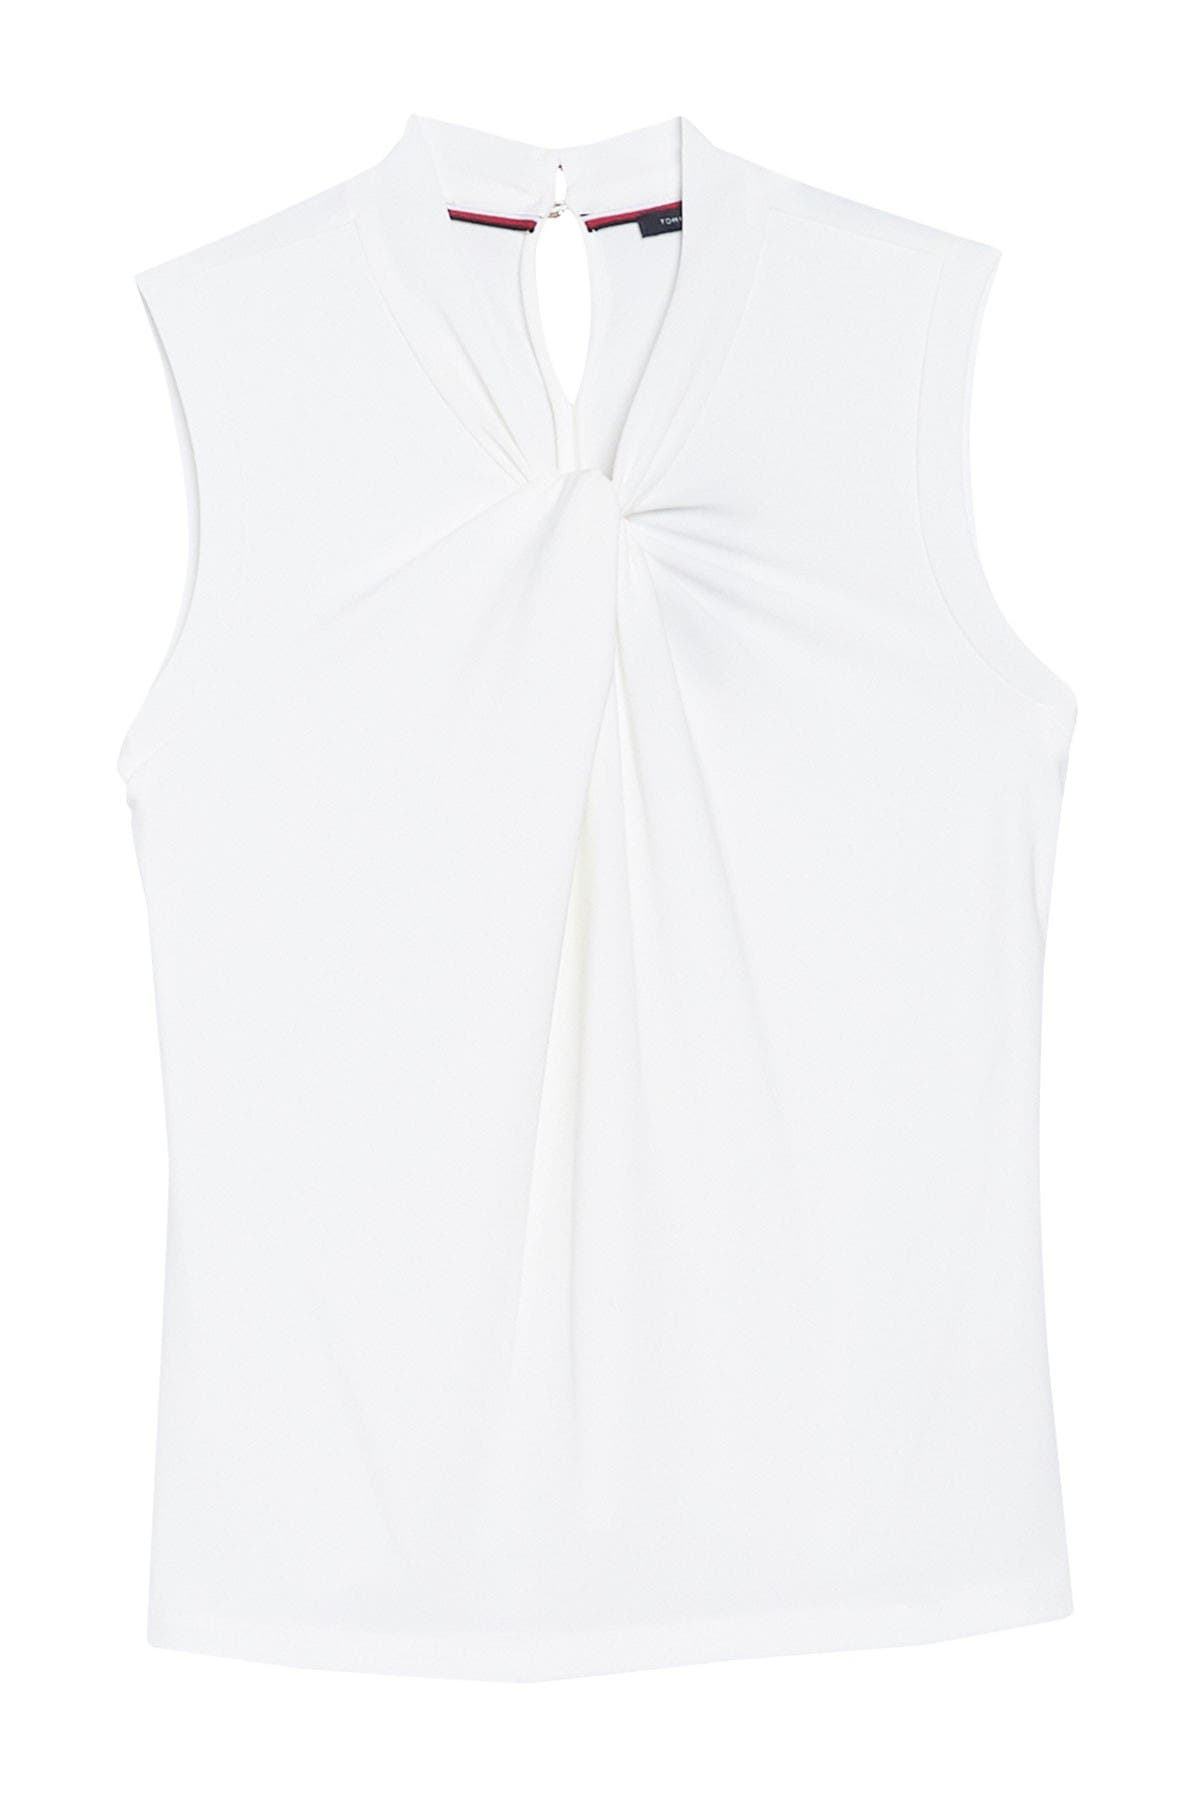 tommy hilfiger sleeveless top